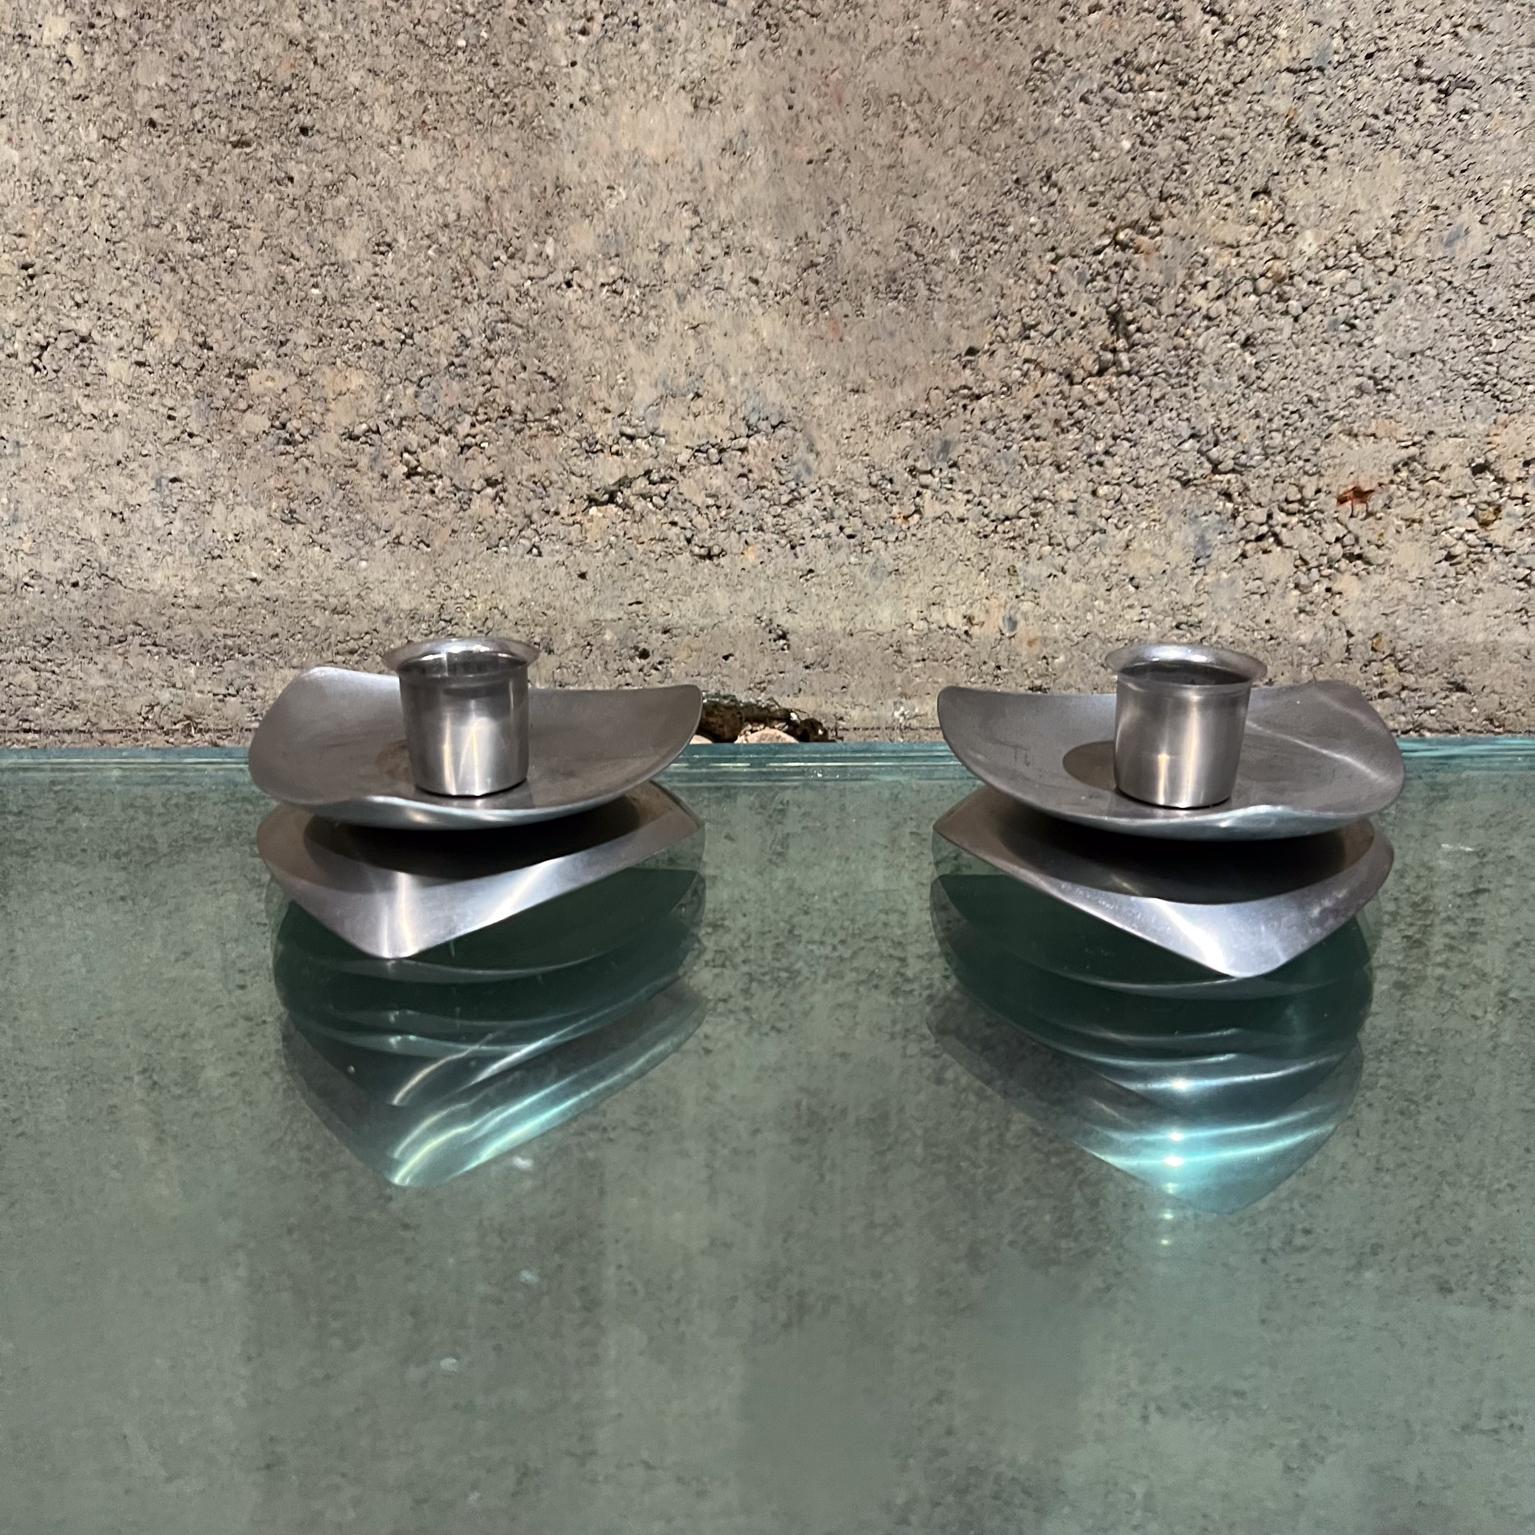 Vintage Modern Candle Holders Avon New York
Set of 2
3.5 diameter x 1.75 h/ candle 1 diameter
Stainless Steel
Stamped by maker
Preowned original vintage condition
Refer to images.